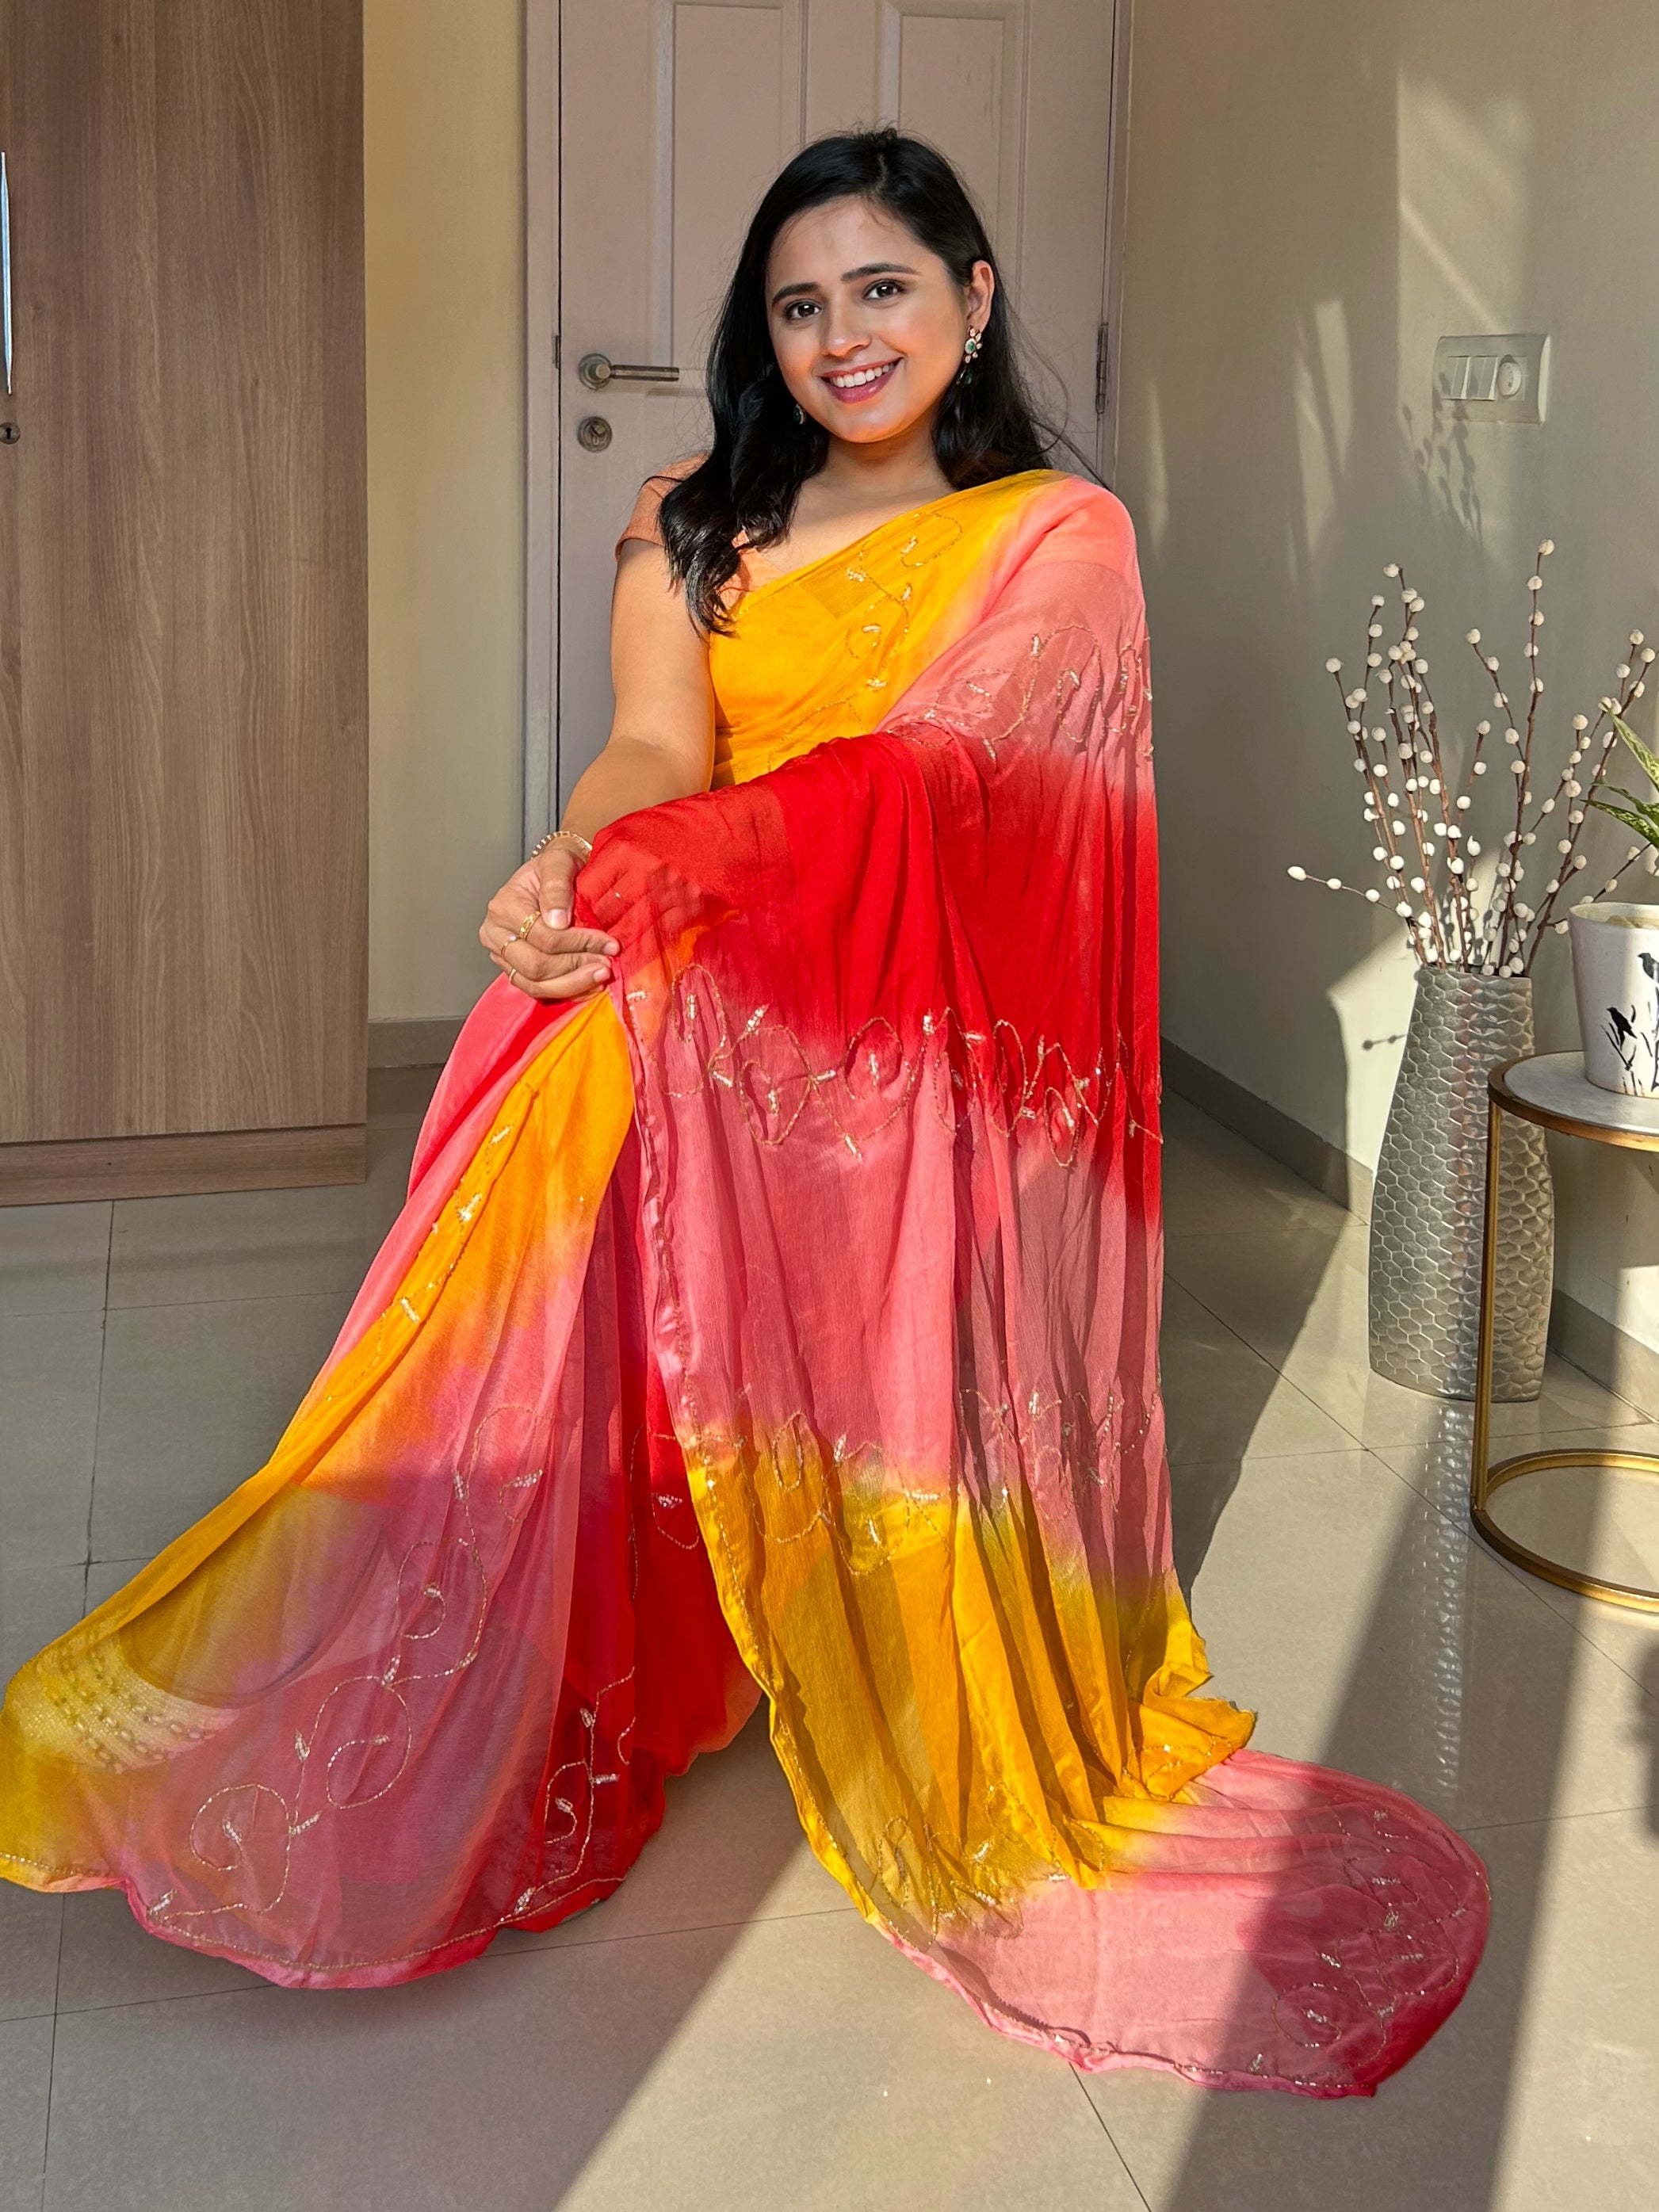 Saree Is In Yellow, Blue And Red Combination